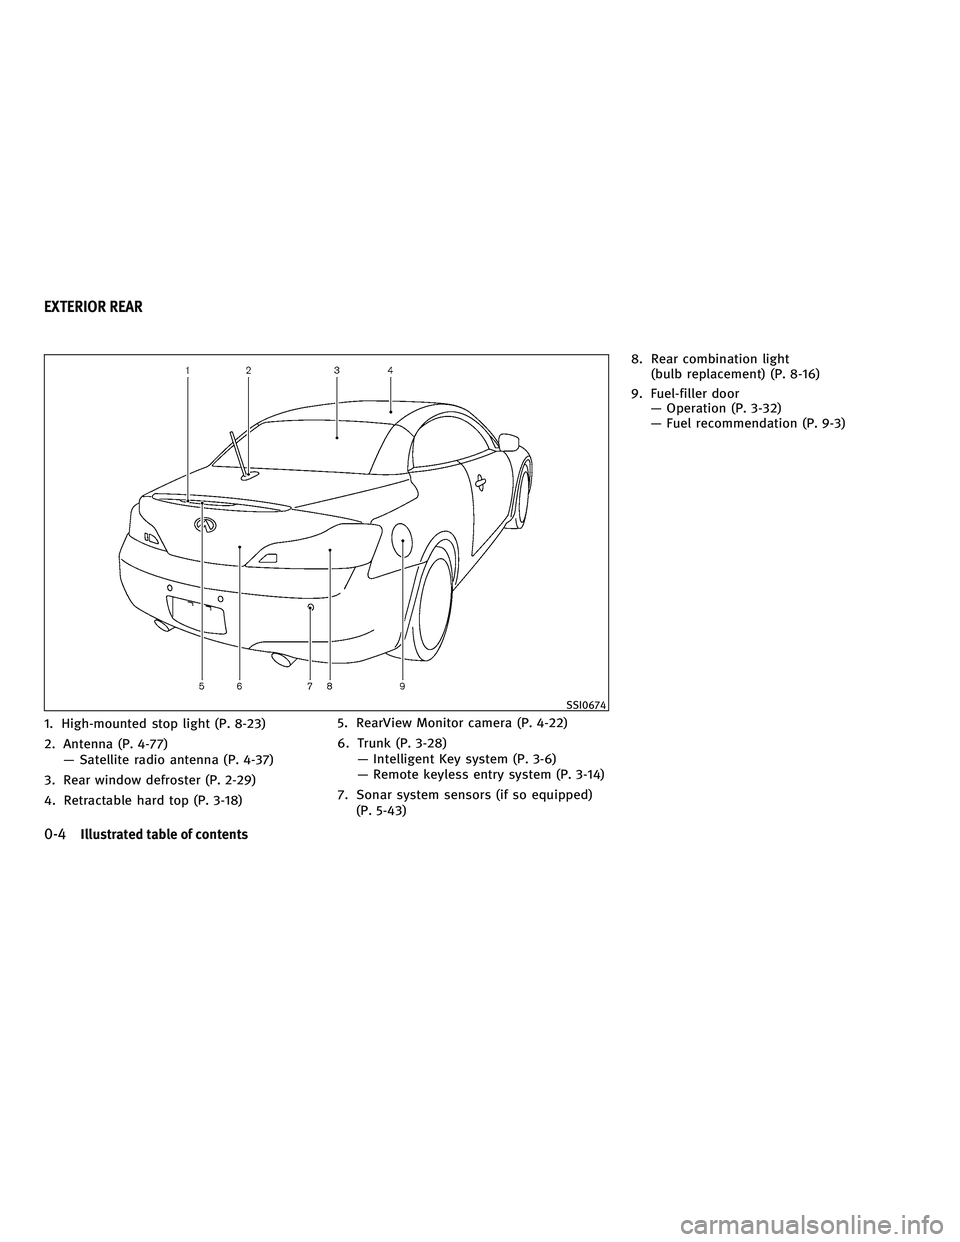 INFINITI G-CONVERTIBLE 2010  Owners Manual 1. High-mounted stop light (P. 8-23)
2. Antenna (P. 4-77)— Satellite radio antenna (P. 4-37)
3. Rear window defroster (P. 2-29)
4. Retractable hard top (P. 3-18) 5. RearView Monitor camera (P. 4-22)